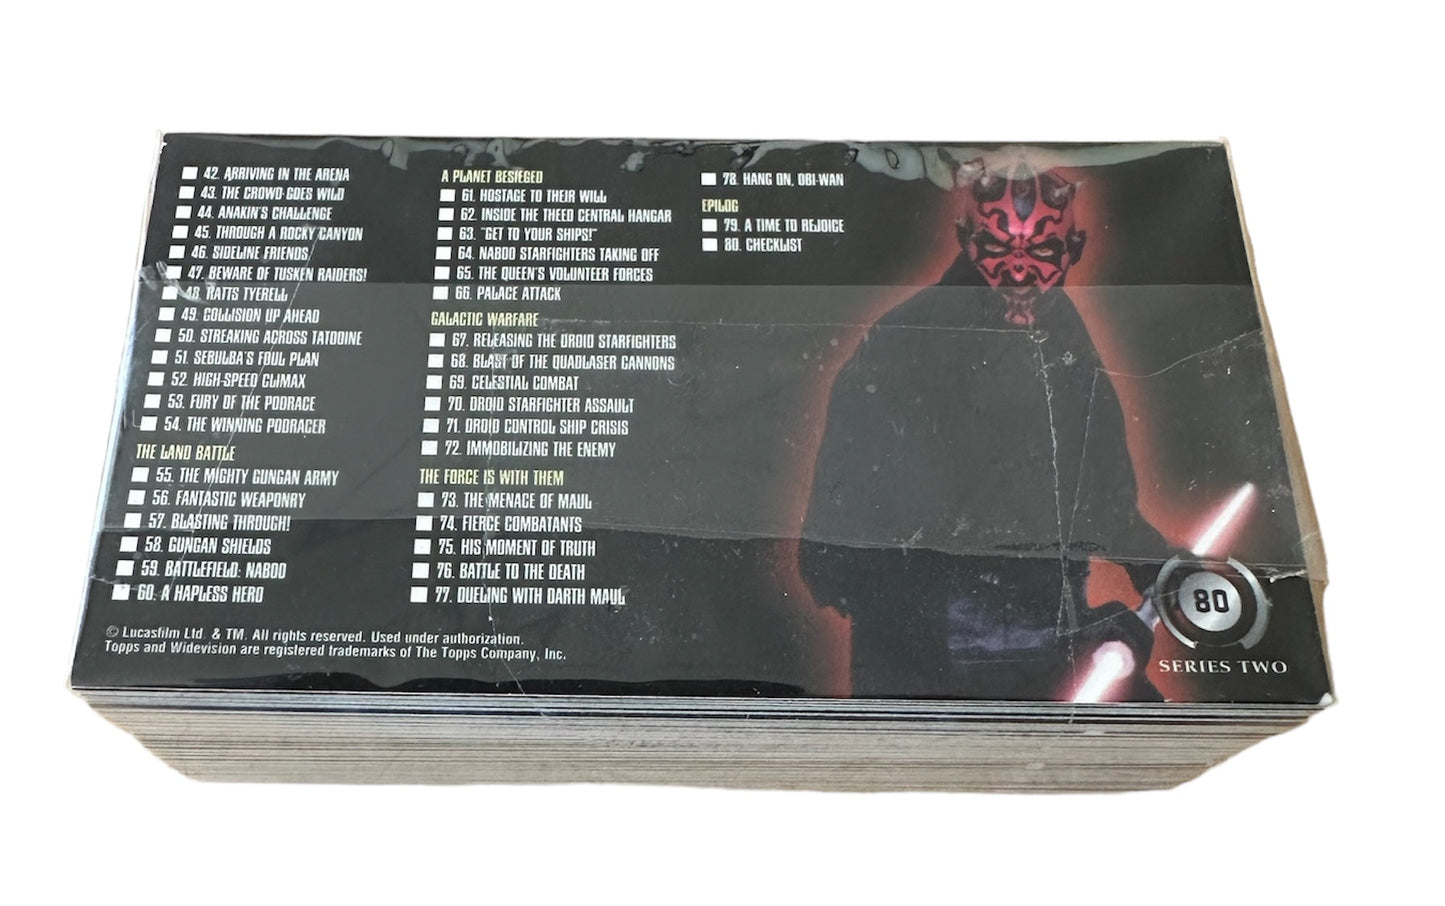 Vintage Topps 1999 Star Wars Episode I Series Two Widevision Basic Trading Card Set / Collector Cards 80 Card Base Set Sealed In Pack - Former Shop Stock